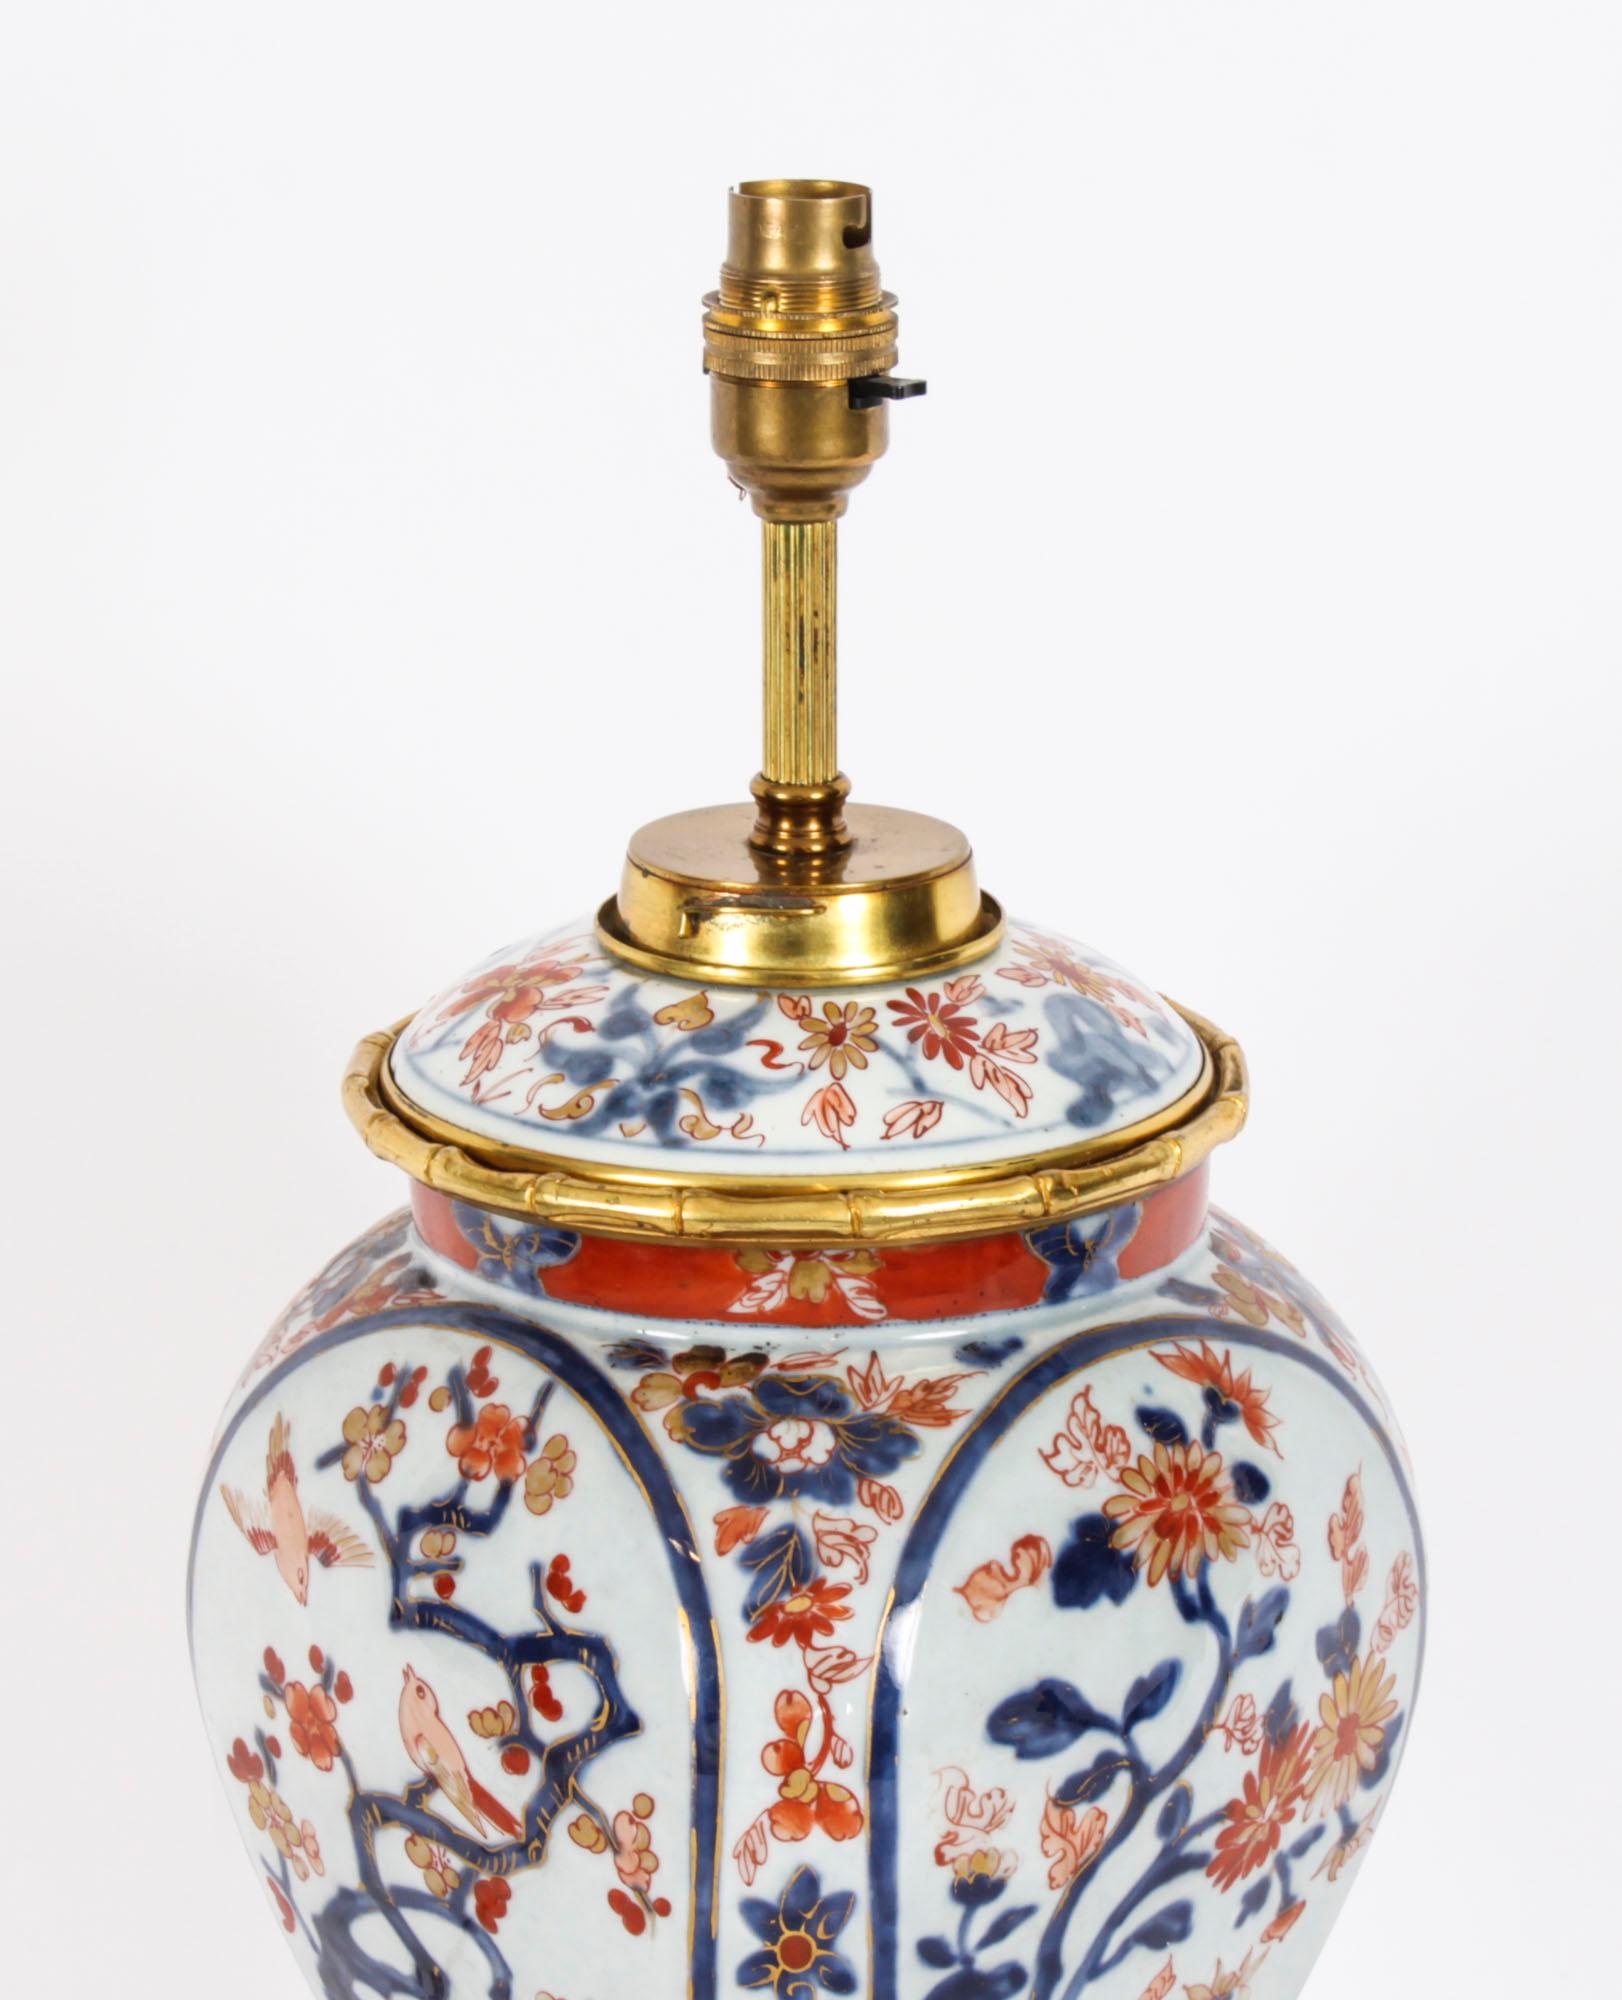 Antique Japanese Imari Porcelain Table Lamp c. 1840 19th Century In Good Condition For Sale In London, GB